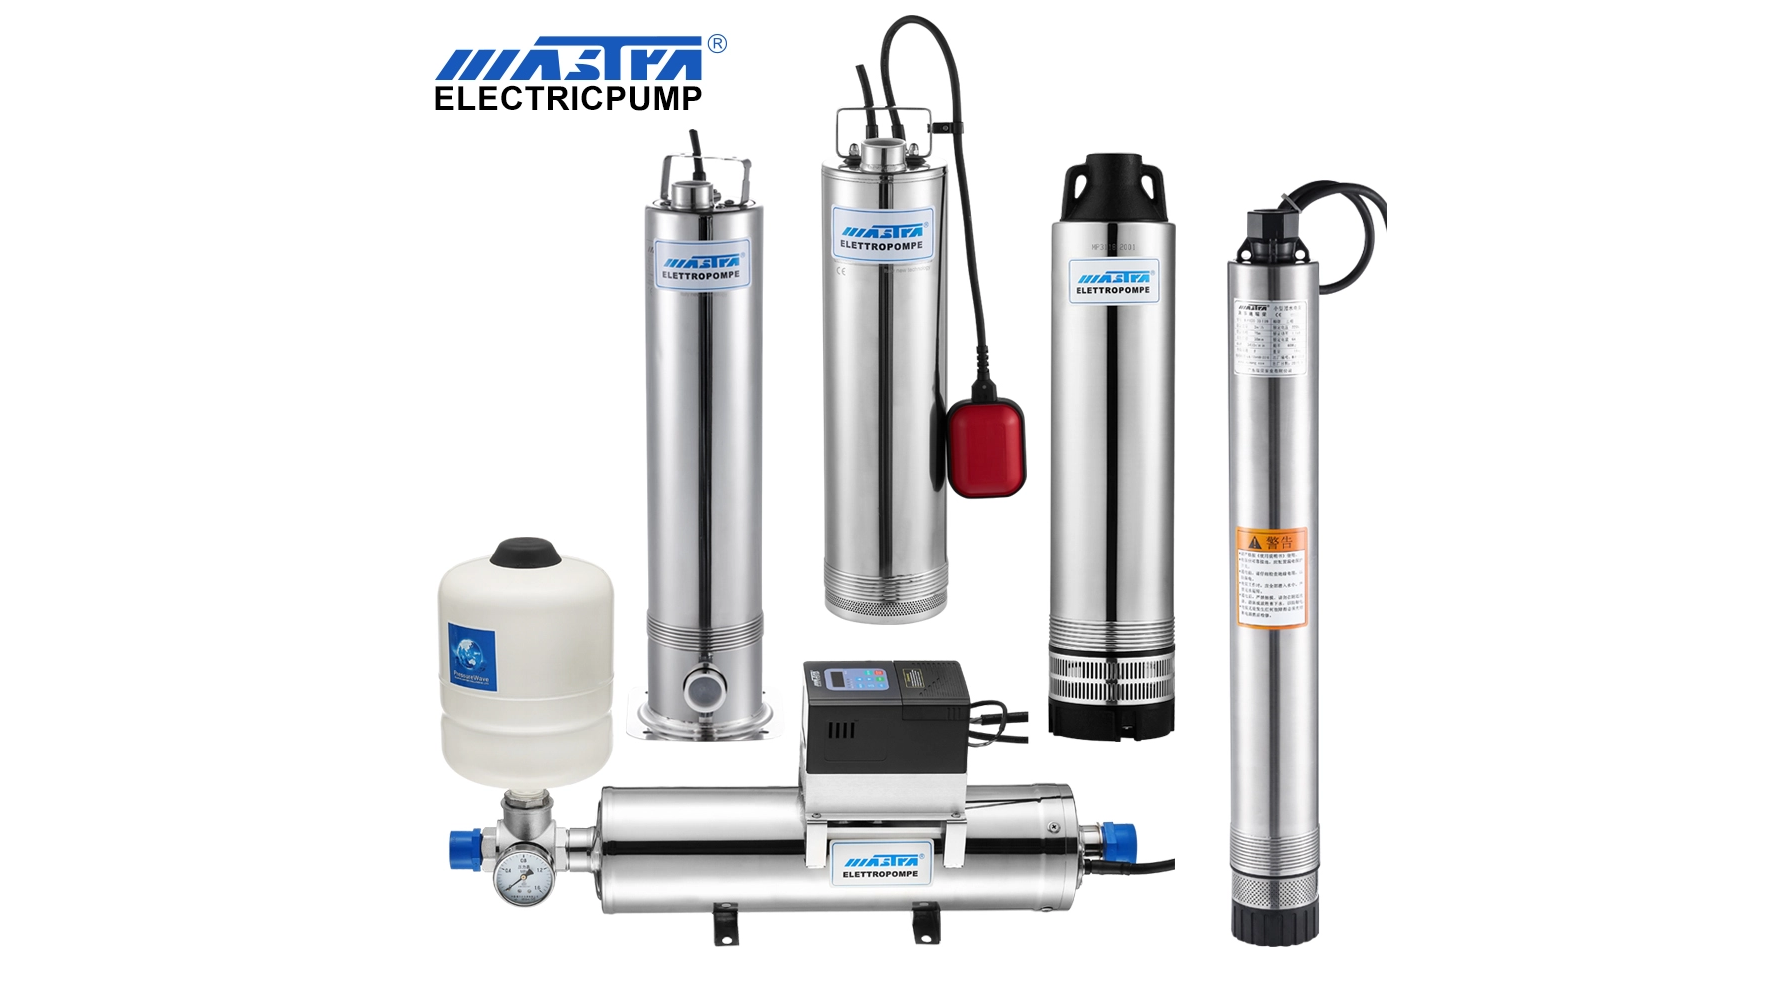 What Are Stainless Steel Submersible Sewage Pumps?